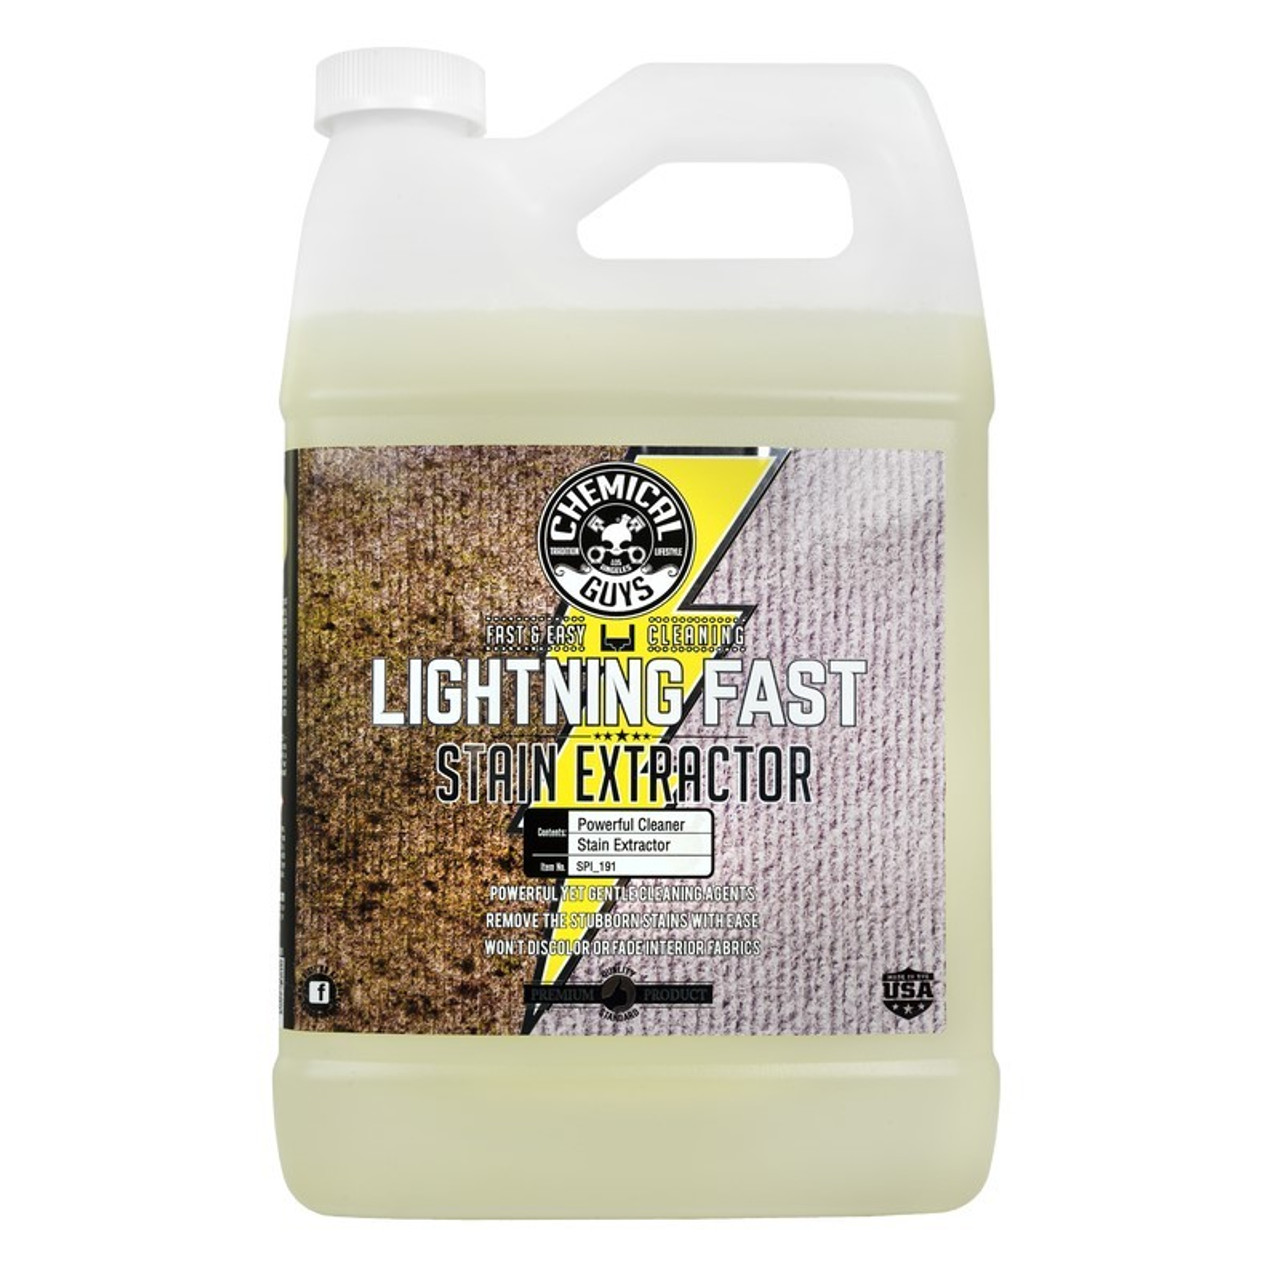 Chemical Guys Lightning Fast Carpet & Upholstery Stain Extractor - 1 Gallon